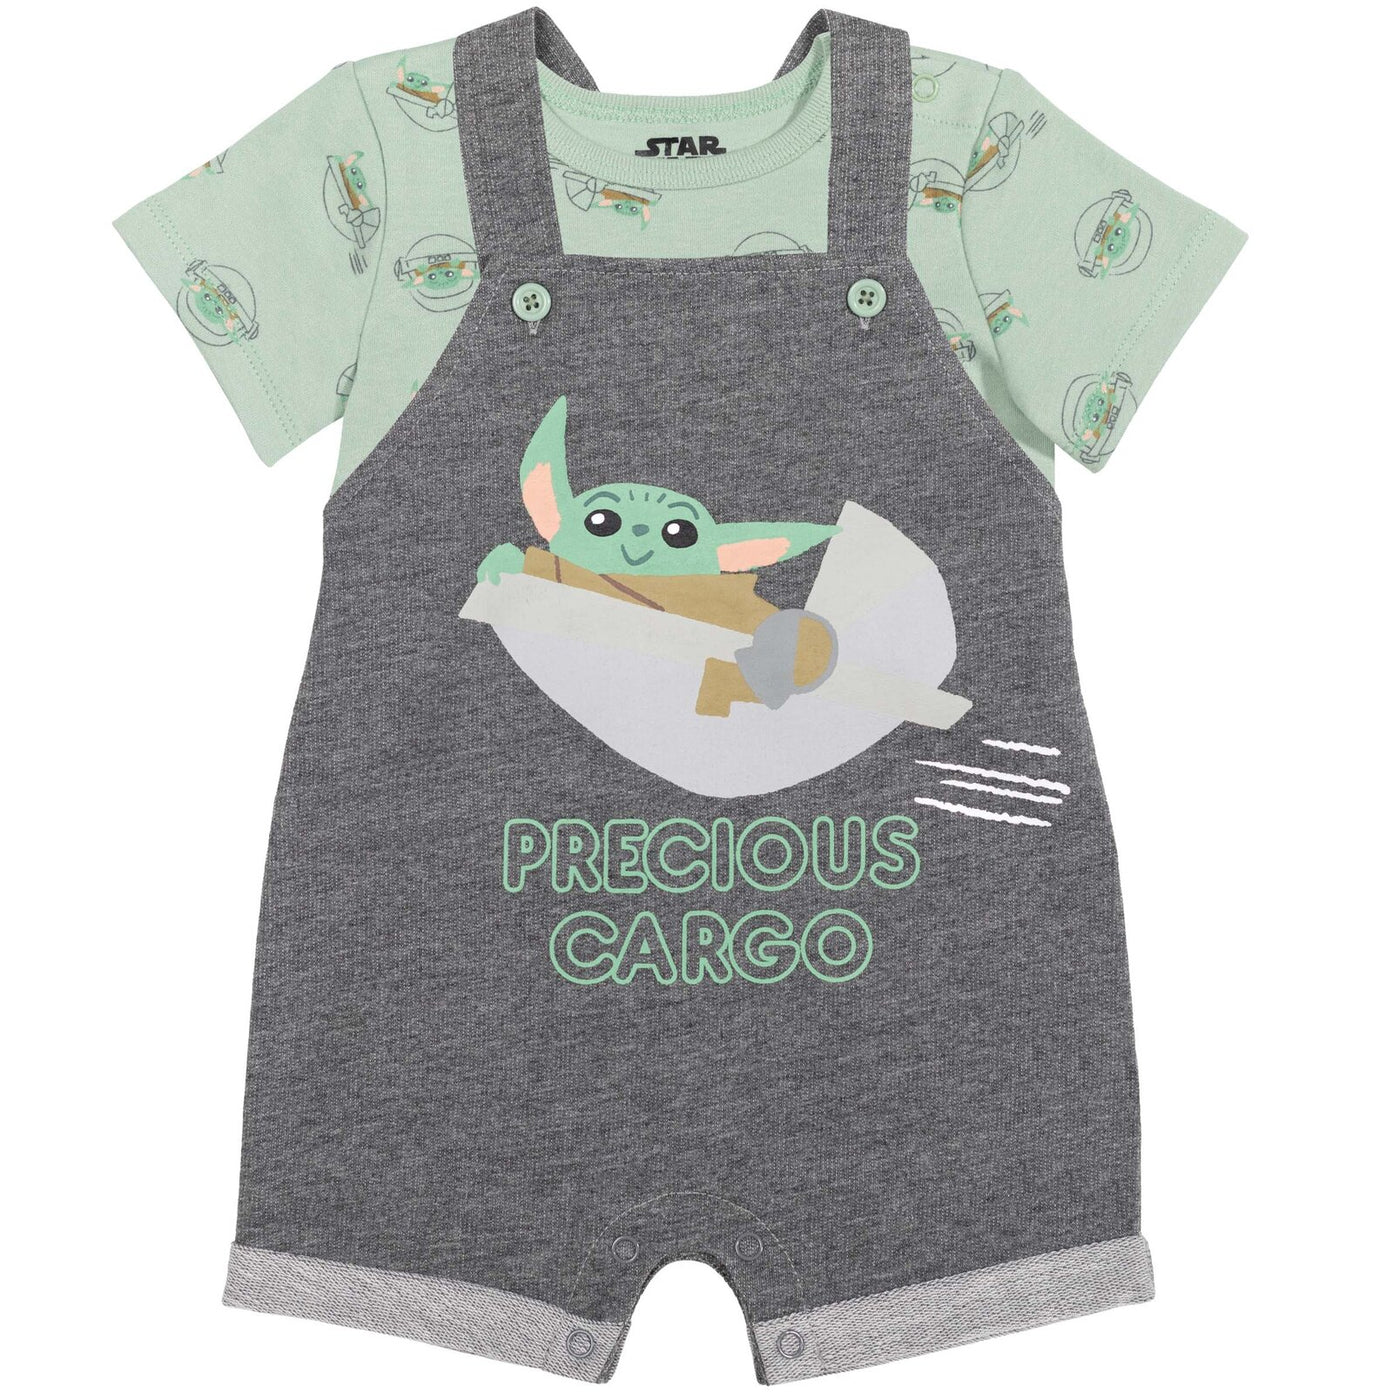 Star Wars Baby Yoda French Terry Short Overalls T-Shirt and Hat 3 Piece Outfit Set